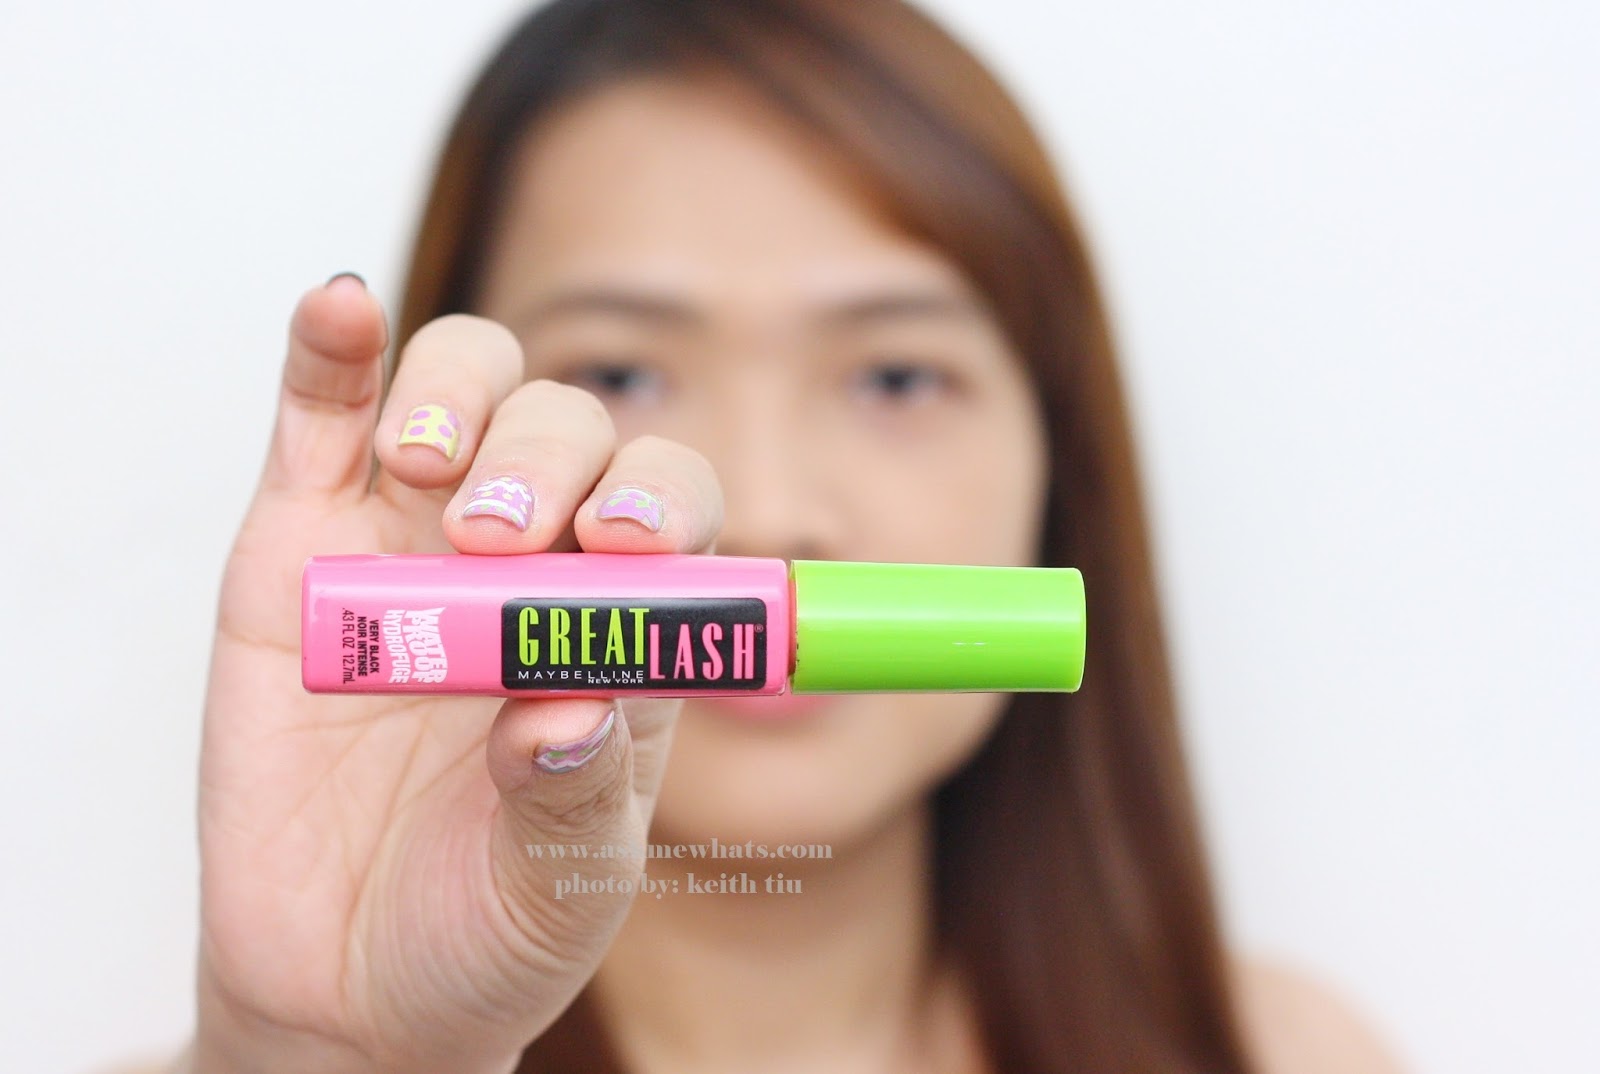 Askmewhats: Maybelline Great Lash Mascara Very Black Review